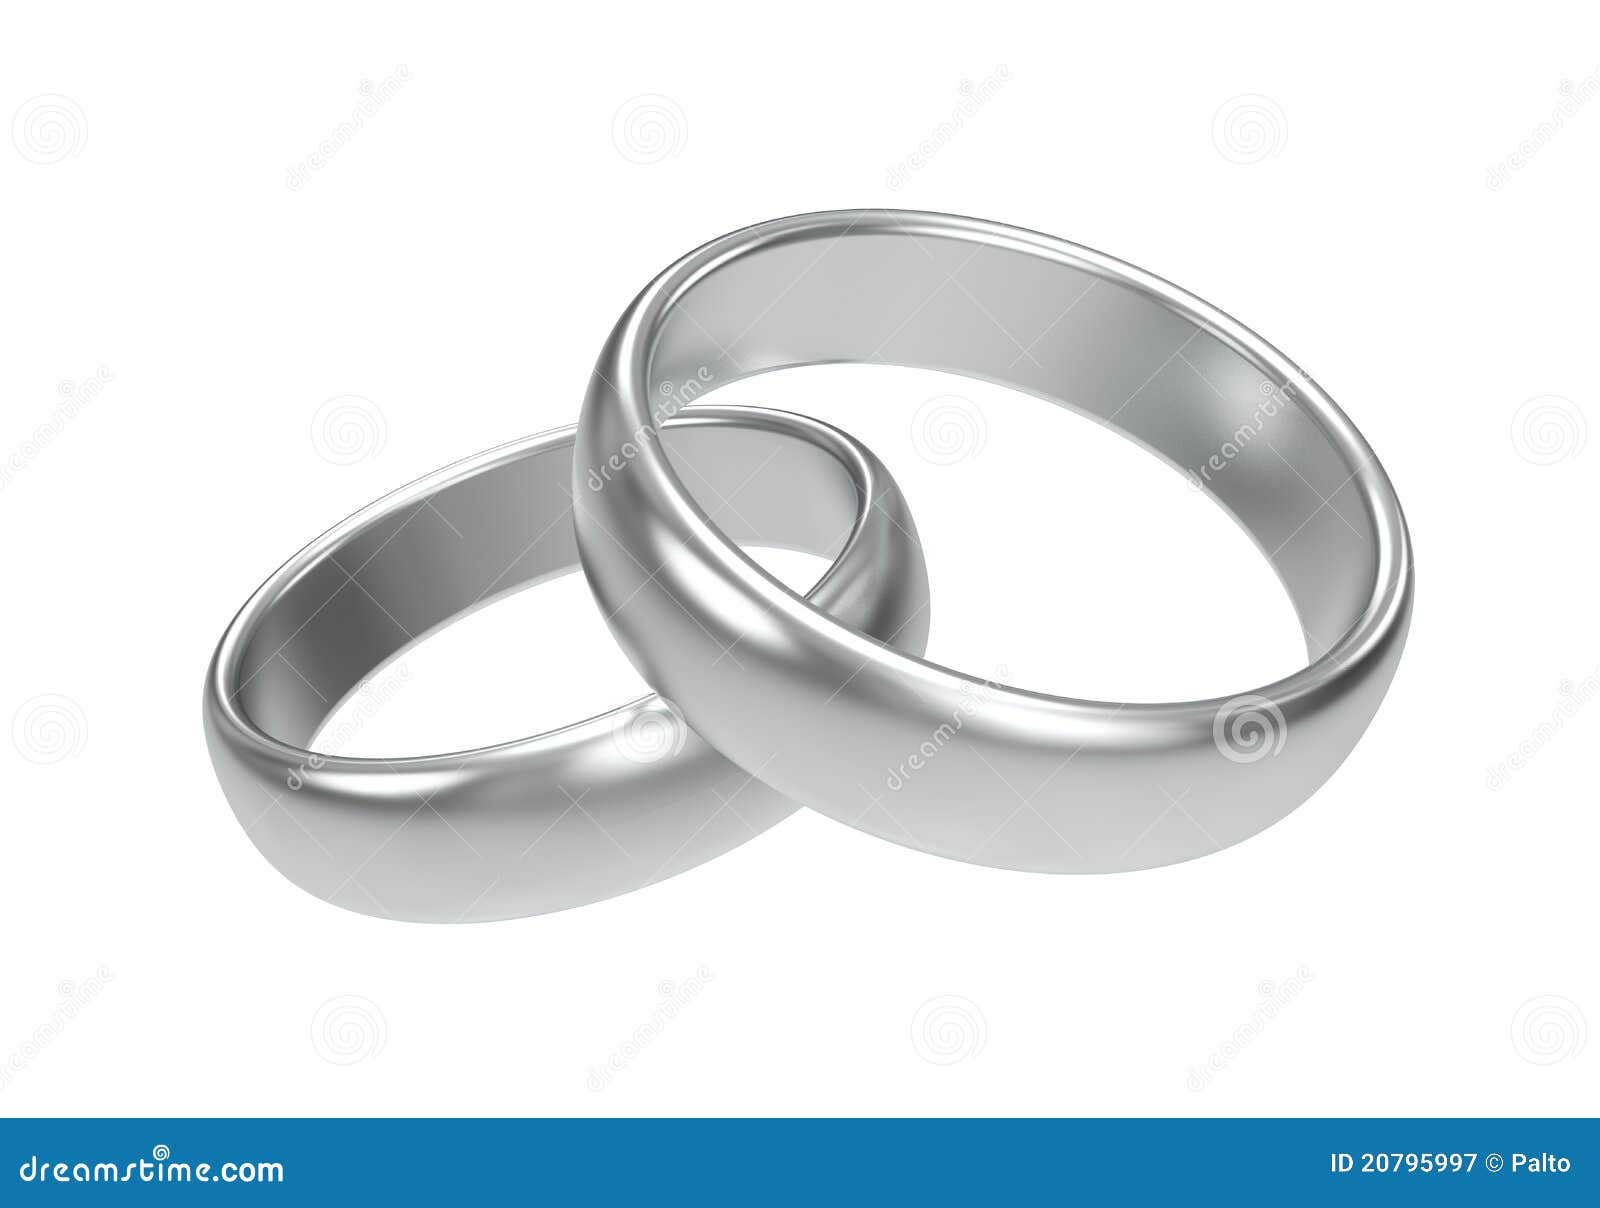  Silver  Wedding  Rings  Royalty Free Stock Photography 